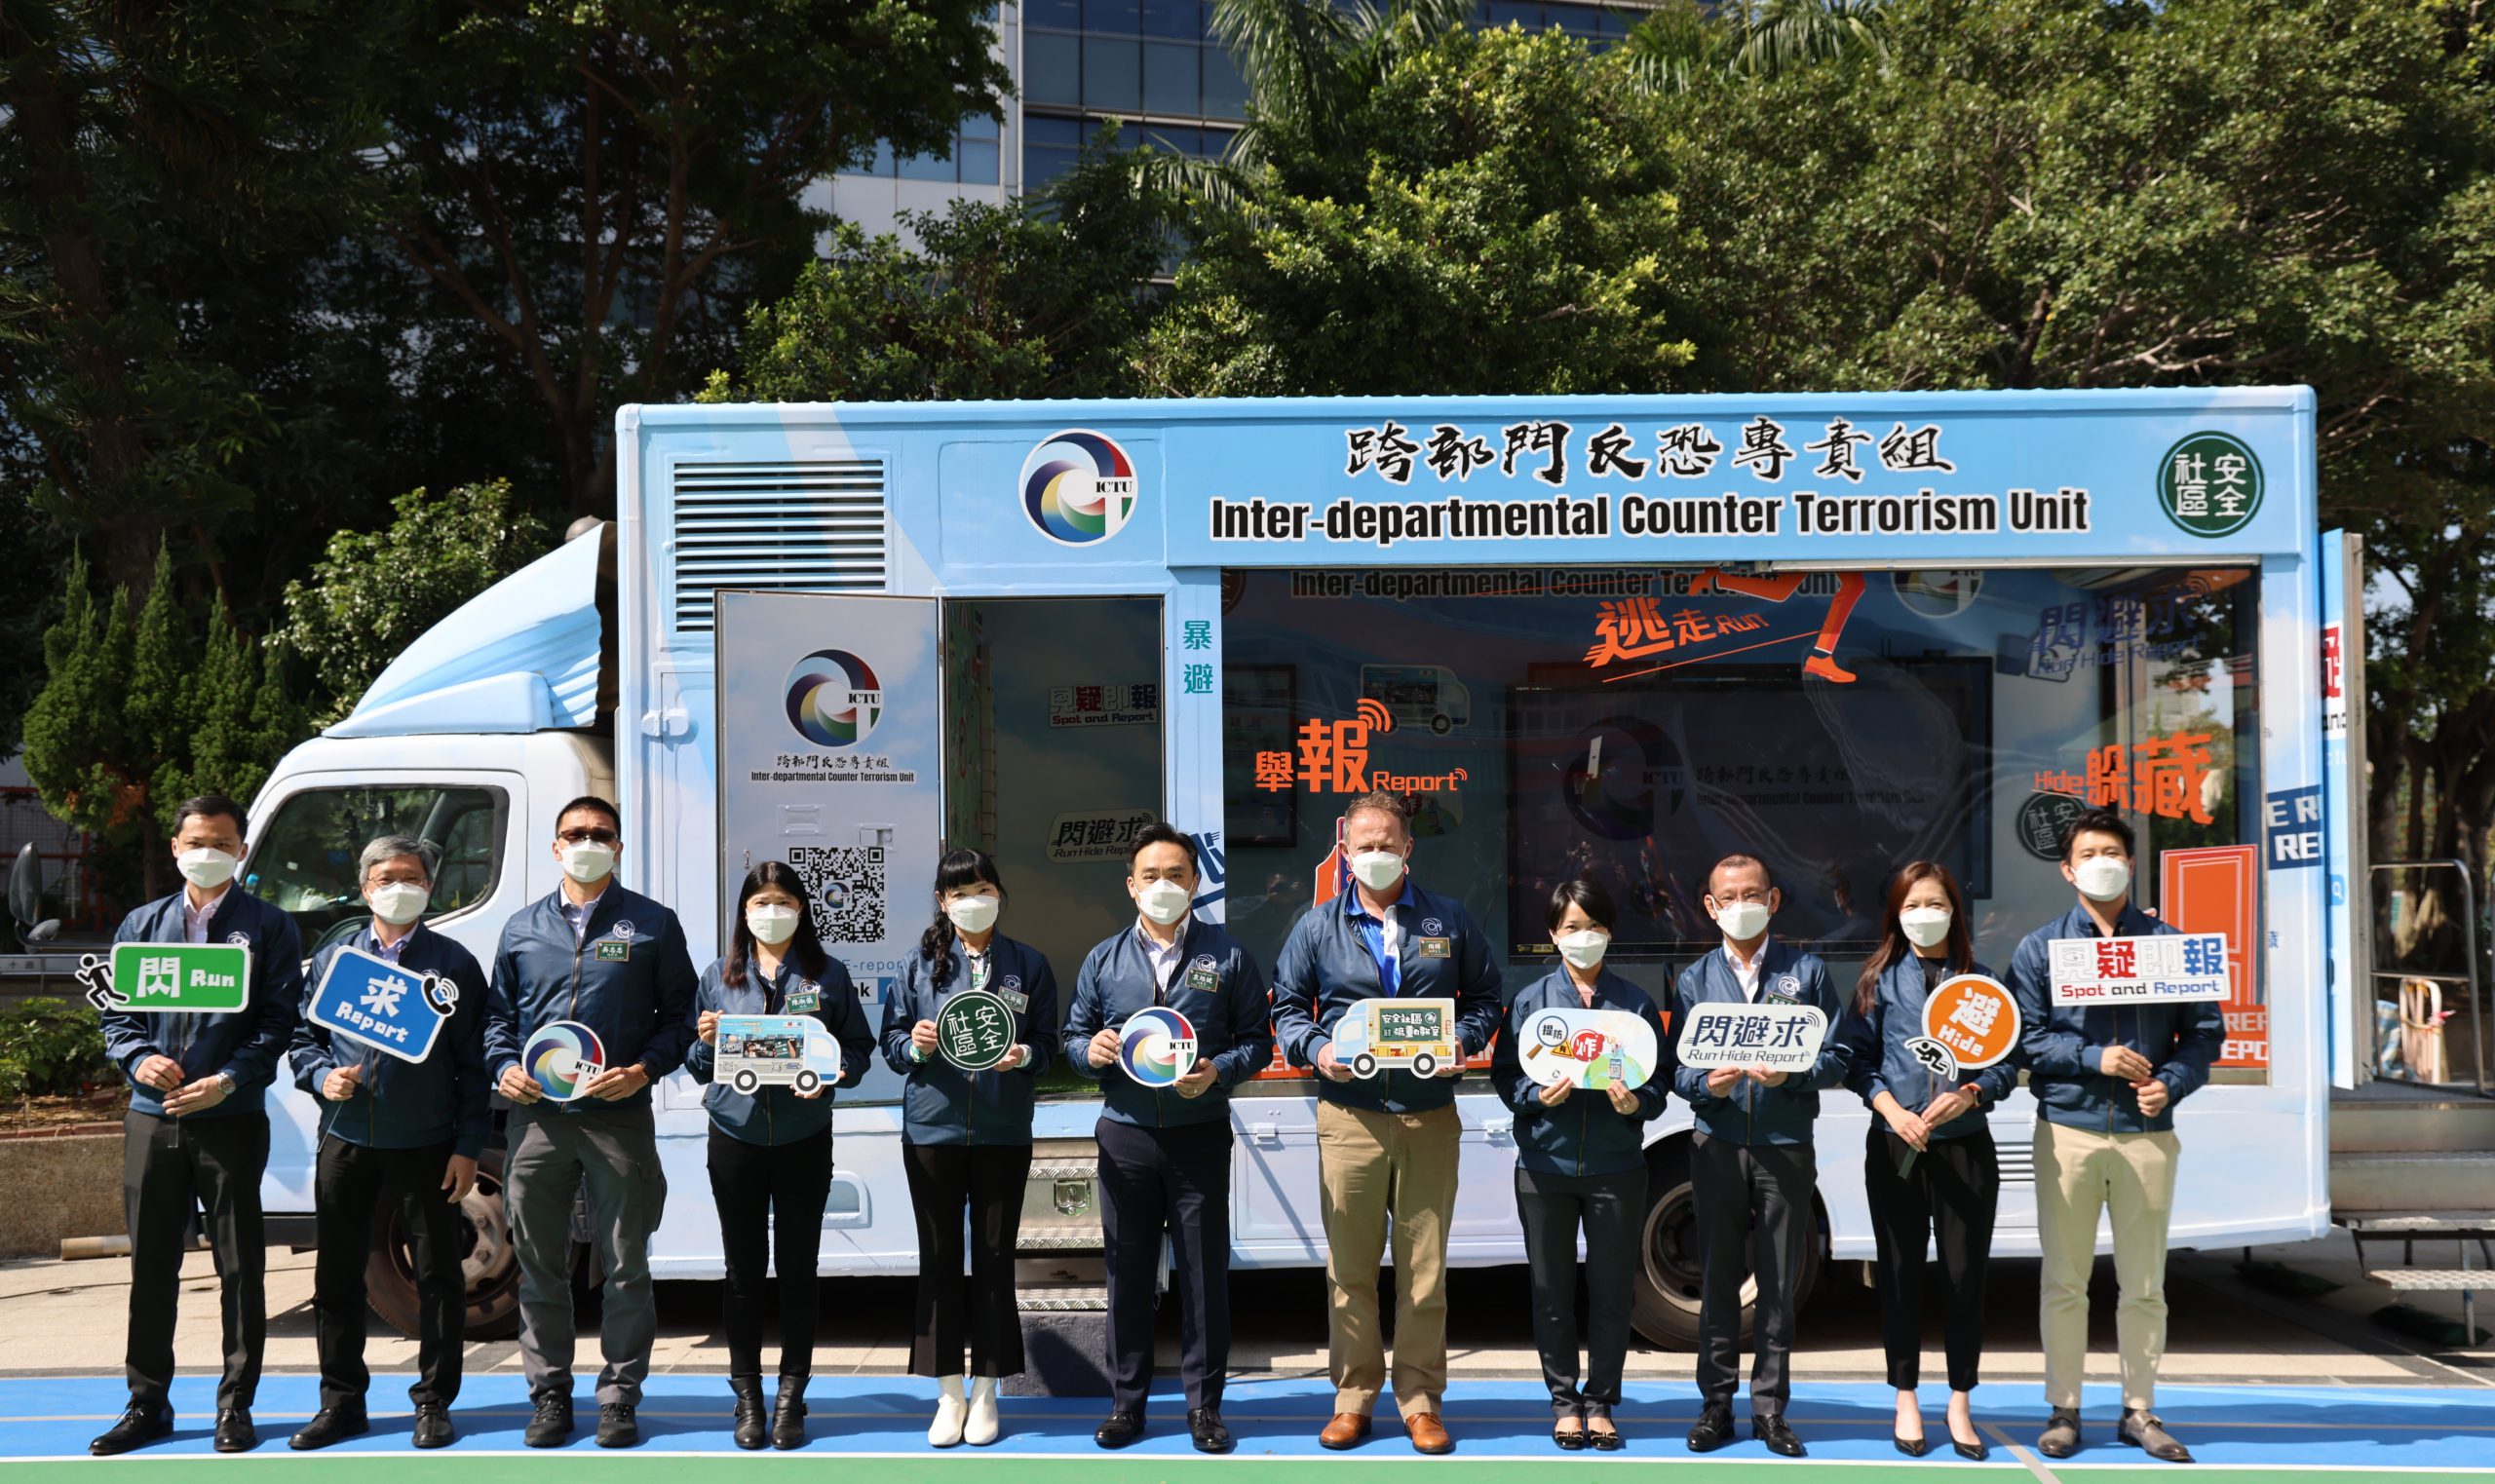 The Launch of Inter-departmental Counter Terrorism Unit’s “Safe Community Mobile Education Truck”